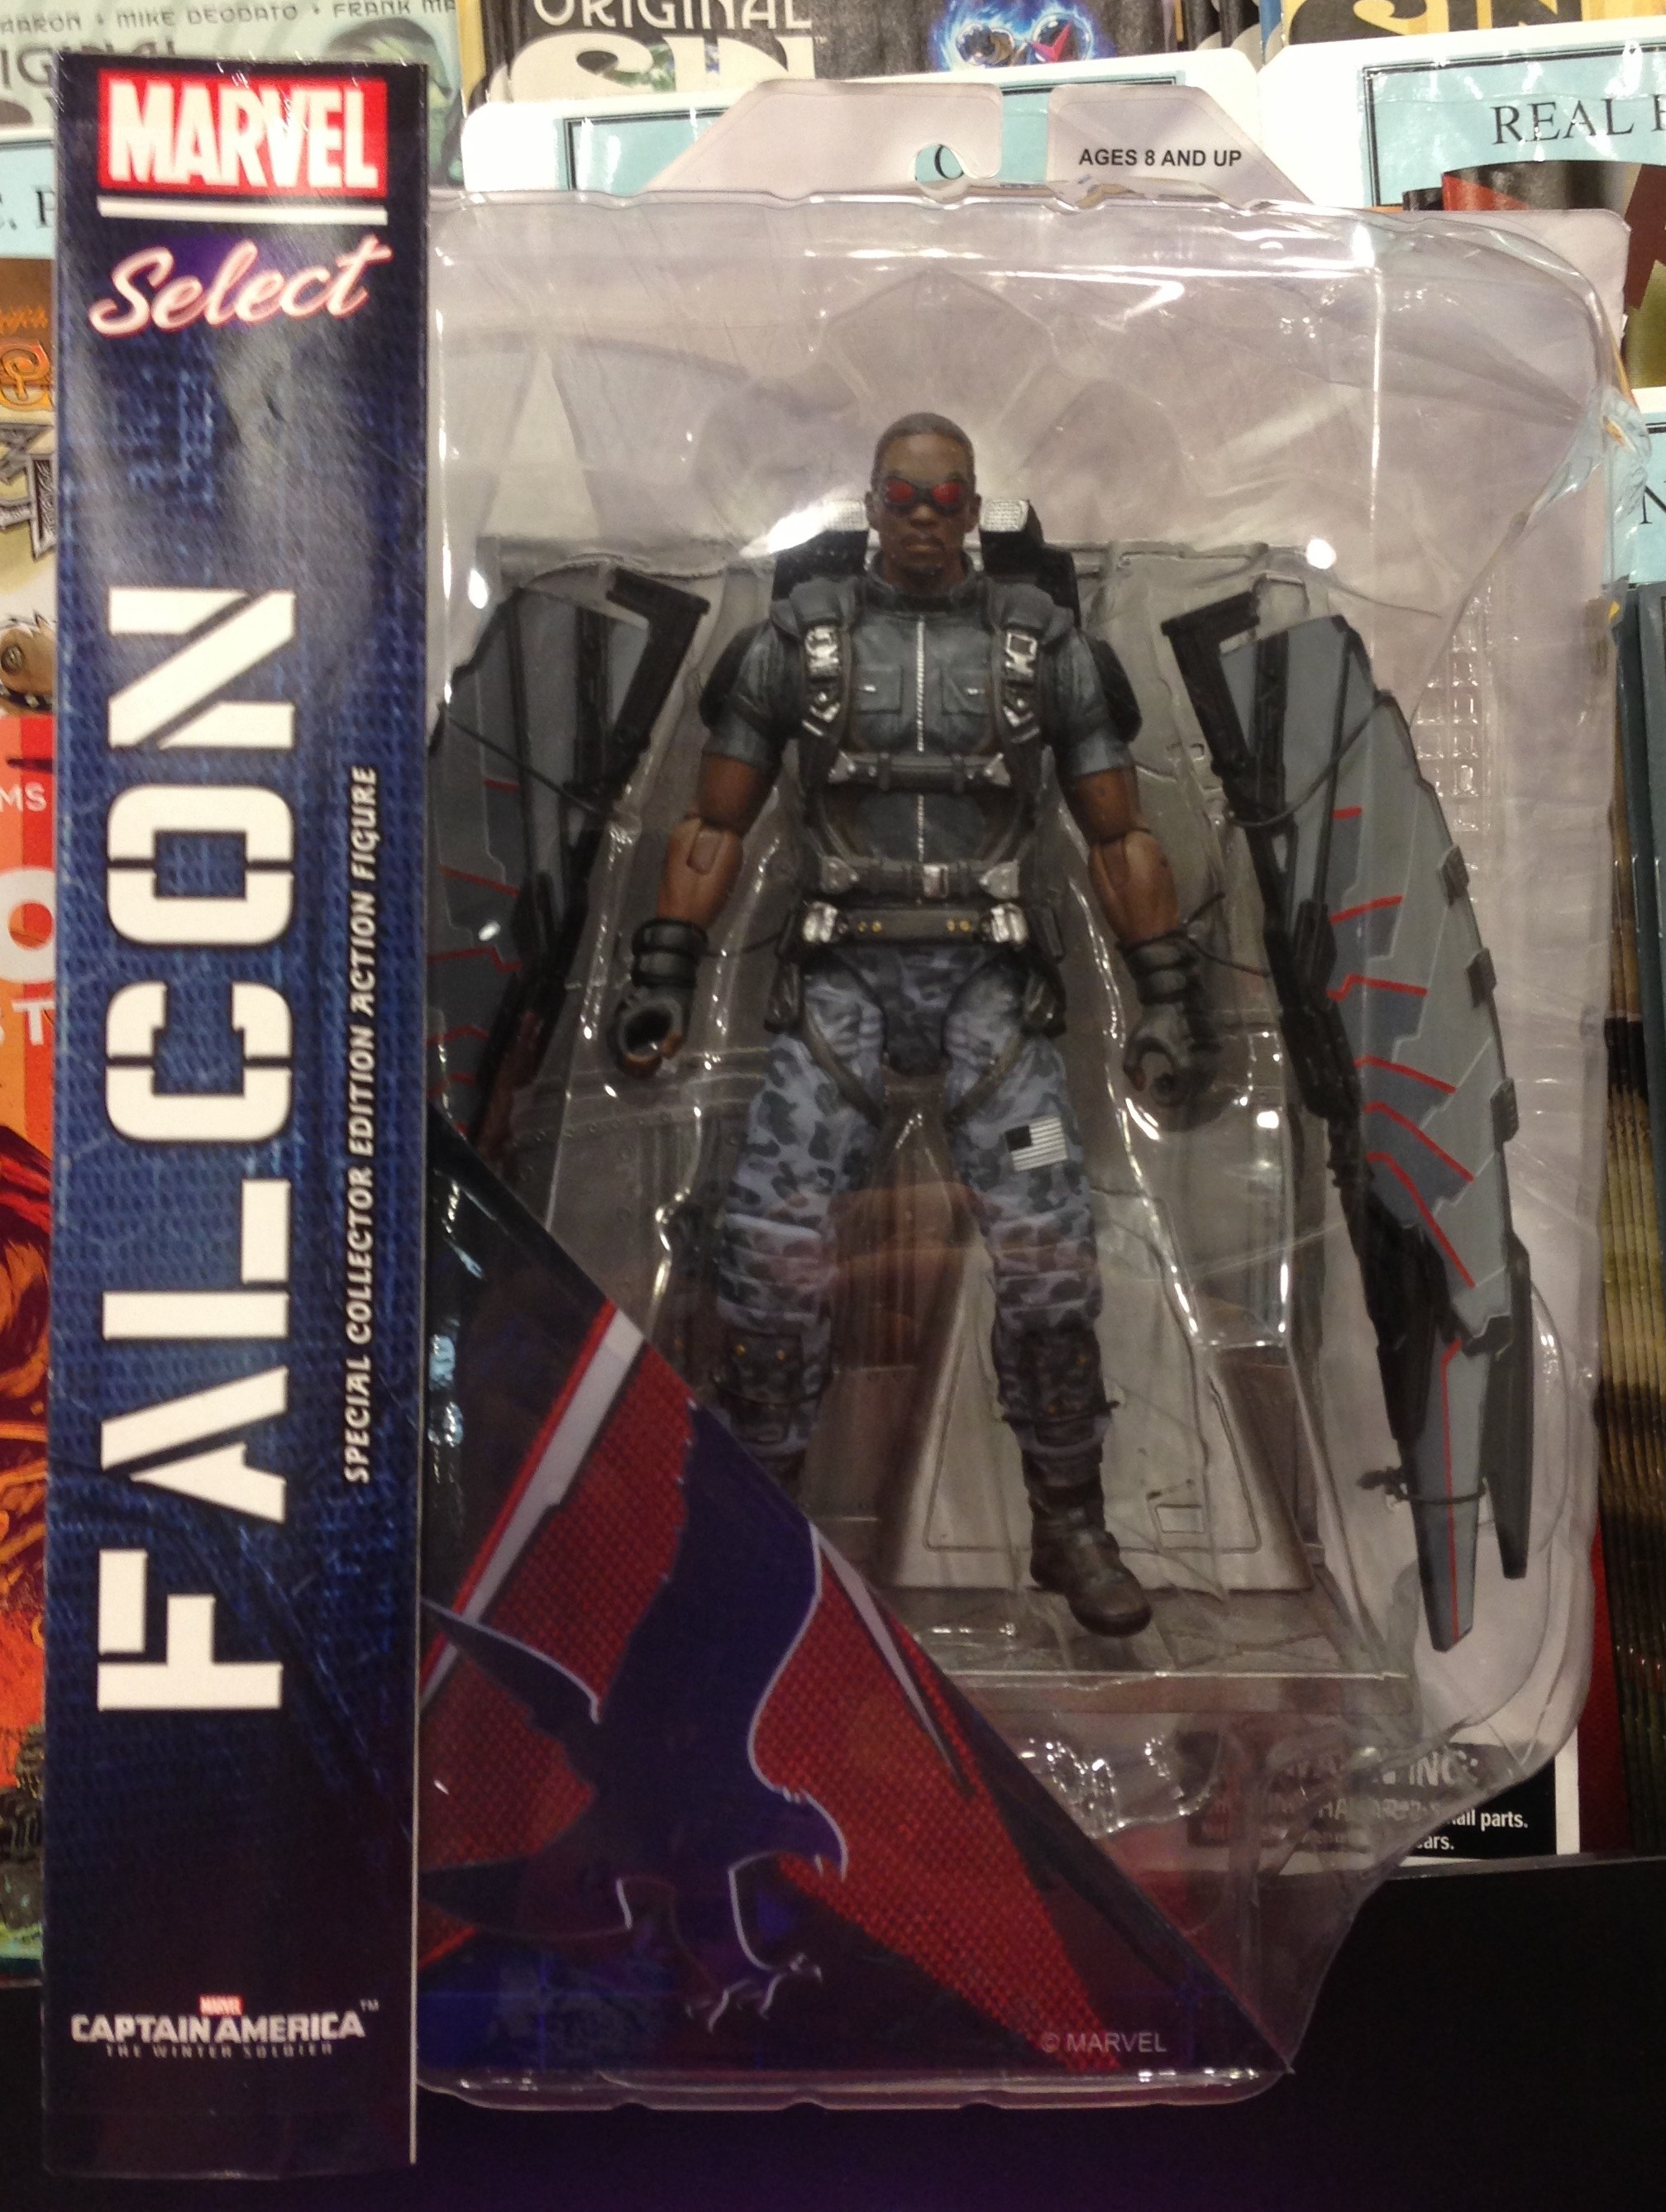 Marvel Select Falcon Movie Figure Released & Photos